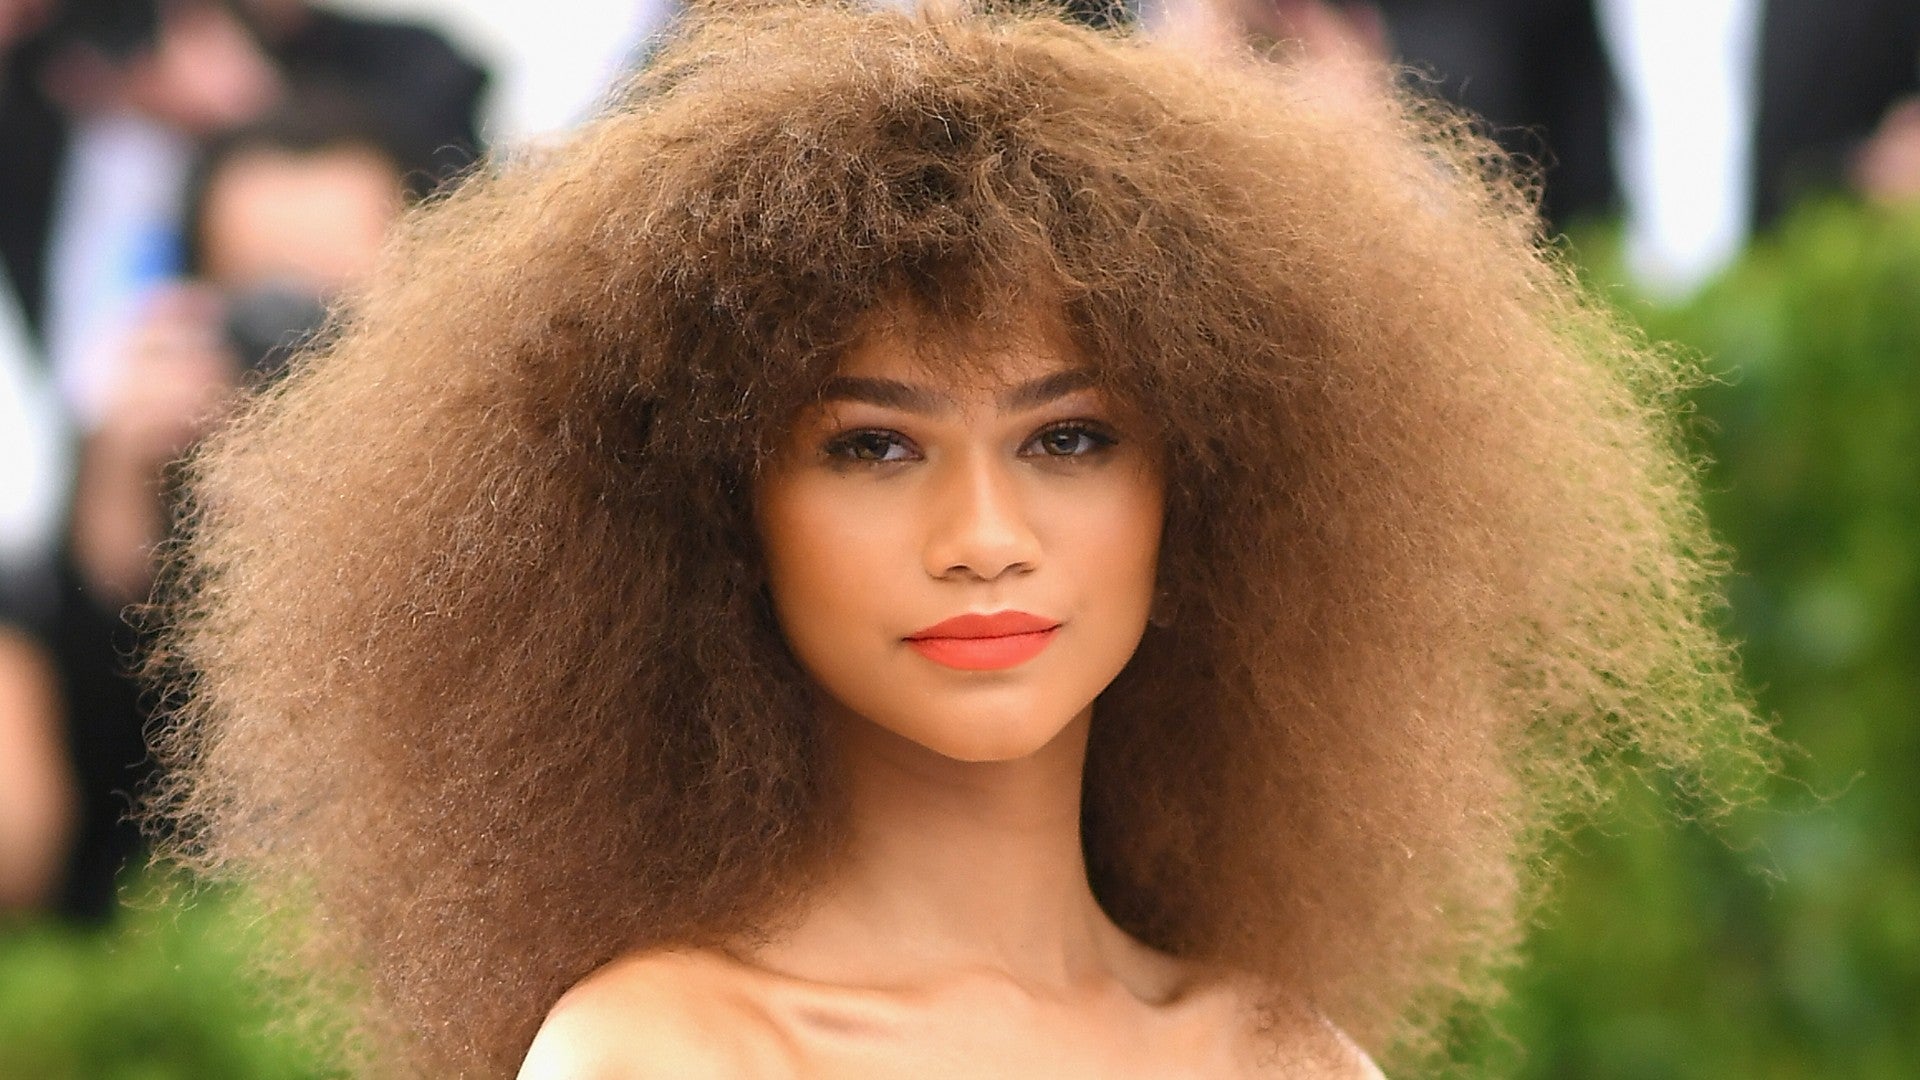 Selfies For Zendaya Grows In Popularity As The Star Responds To The Hashtag